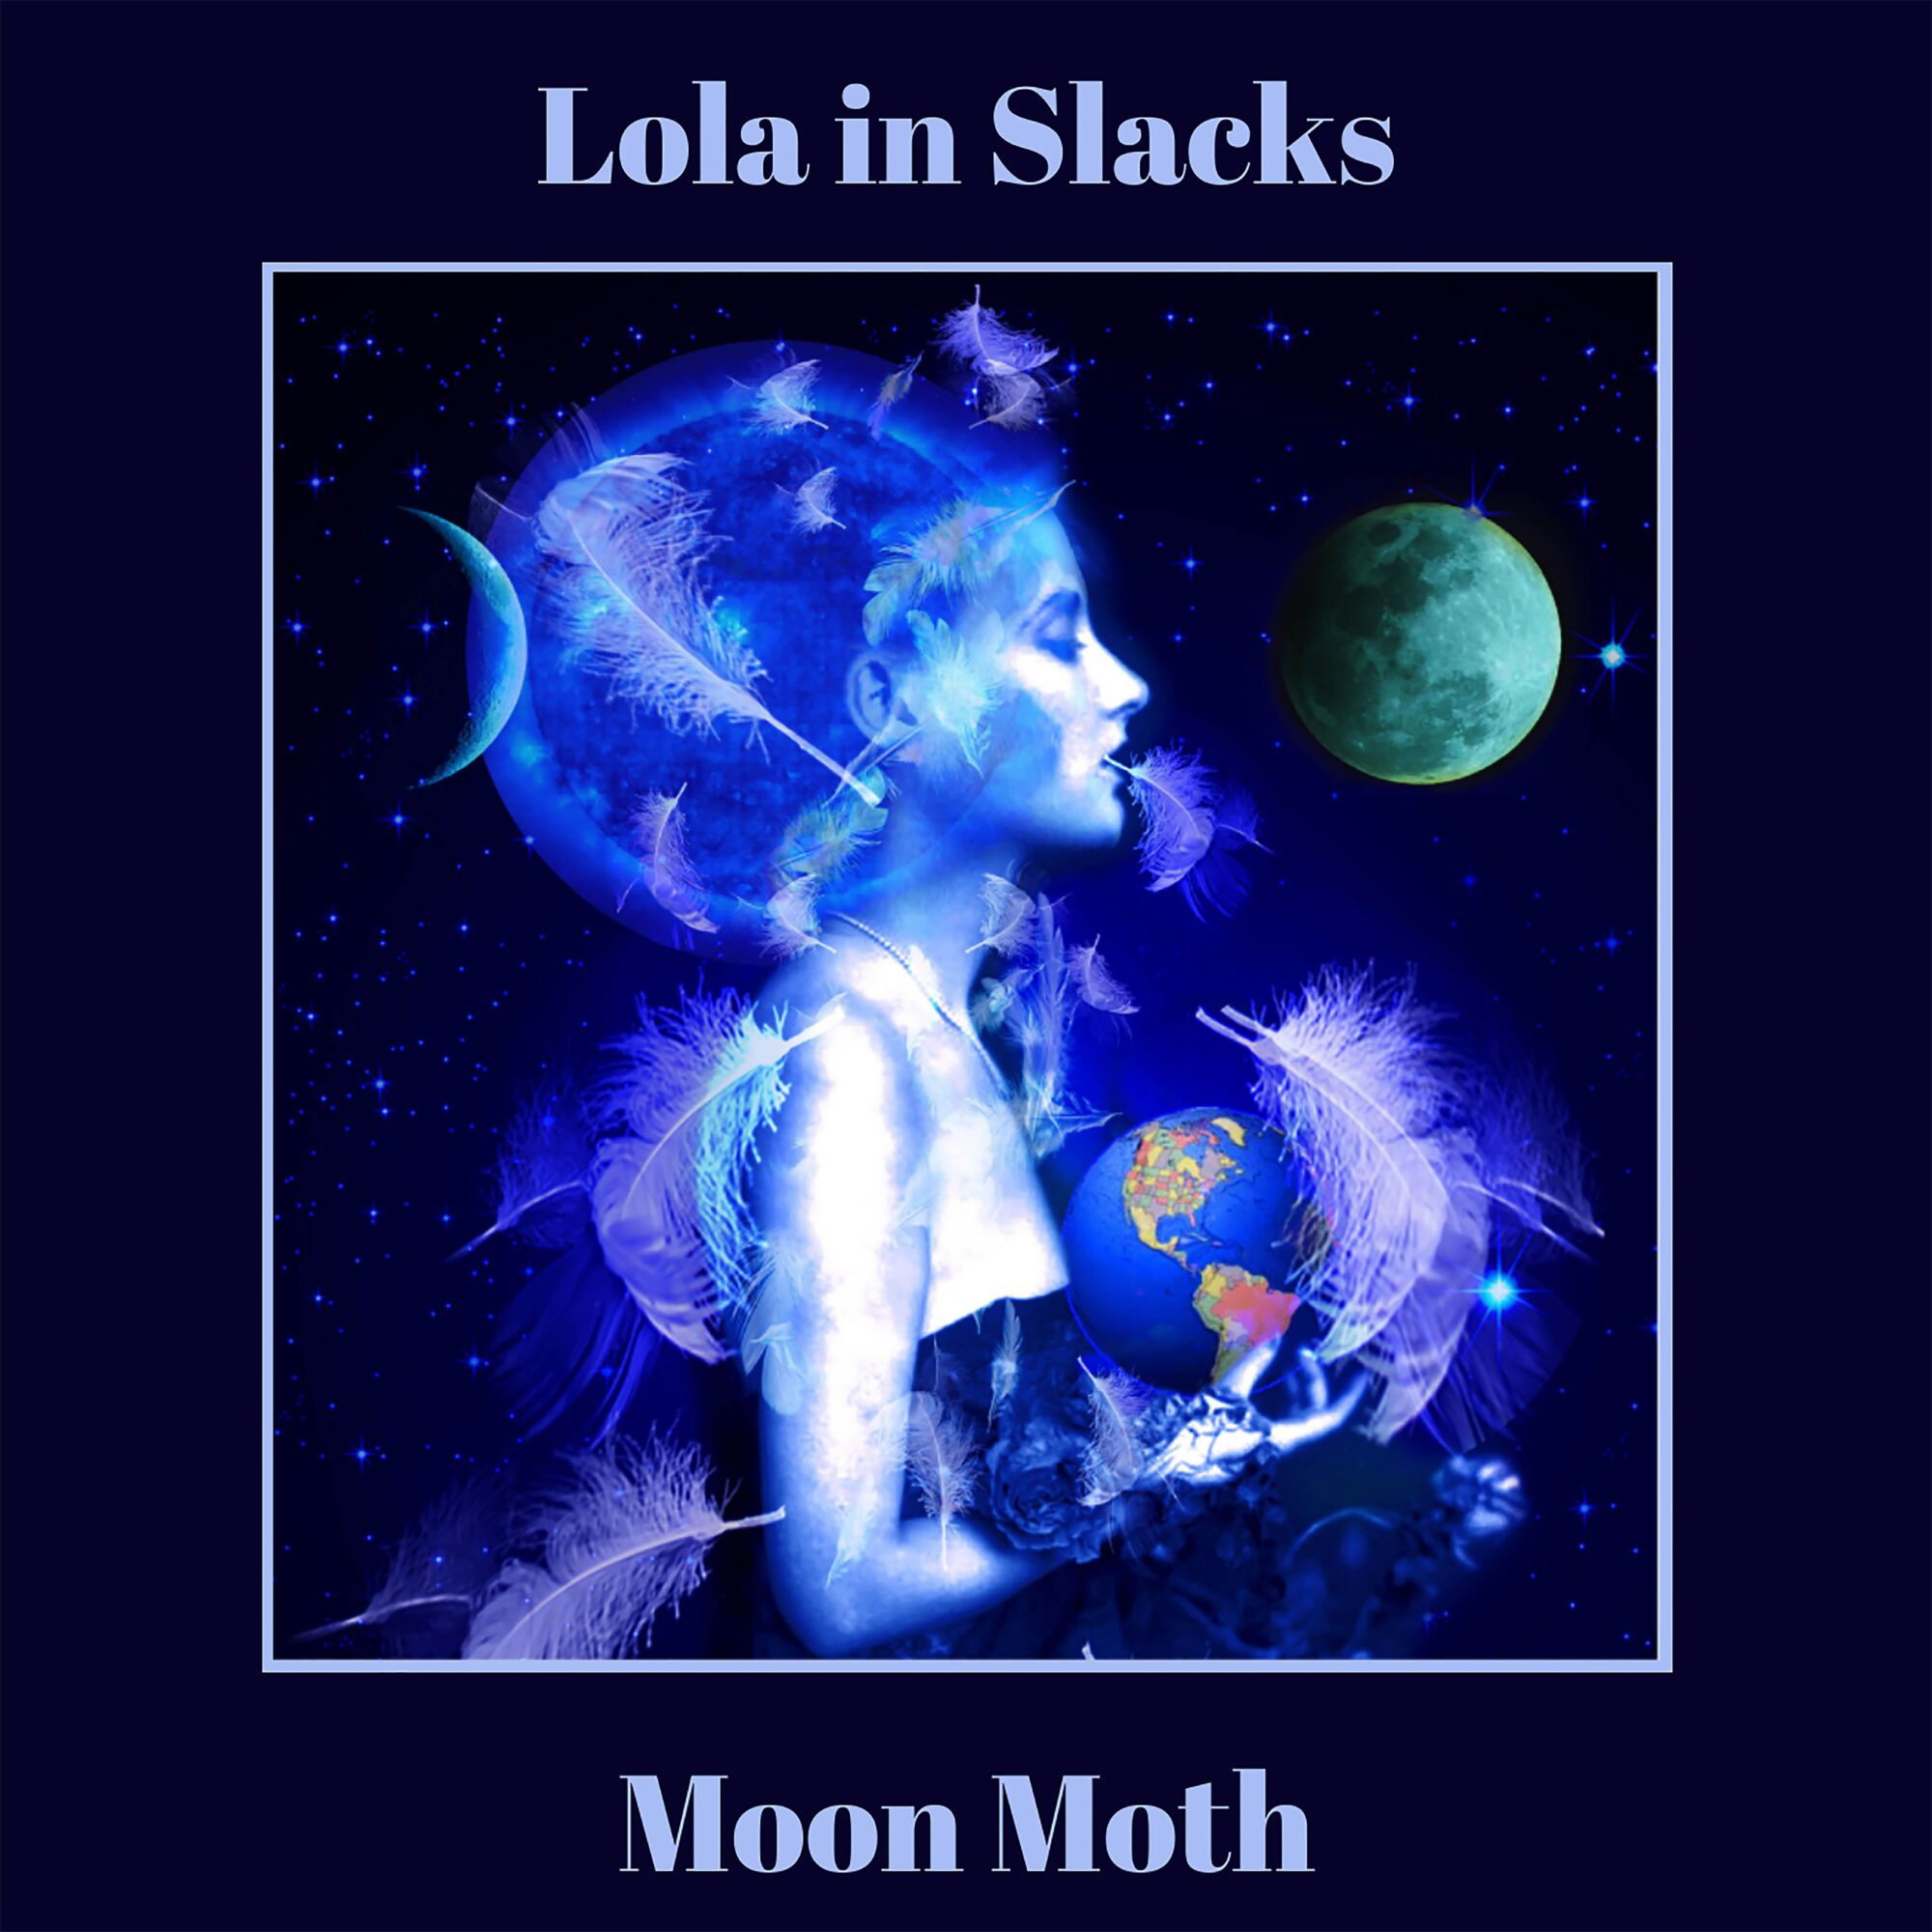 Lola in Slacks has a new album out